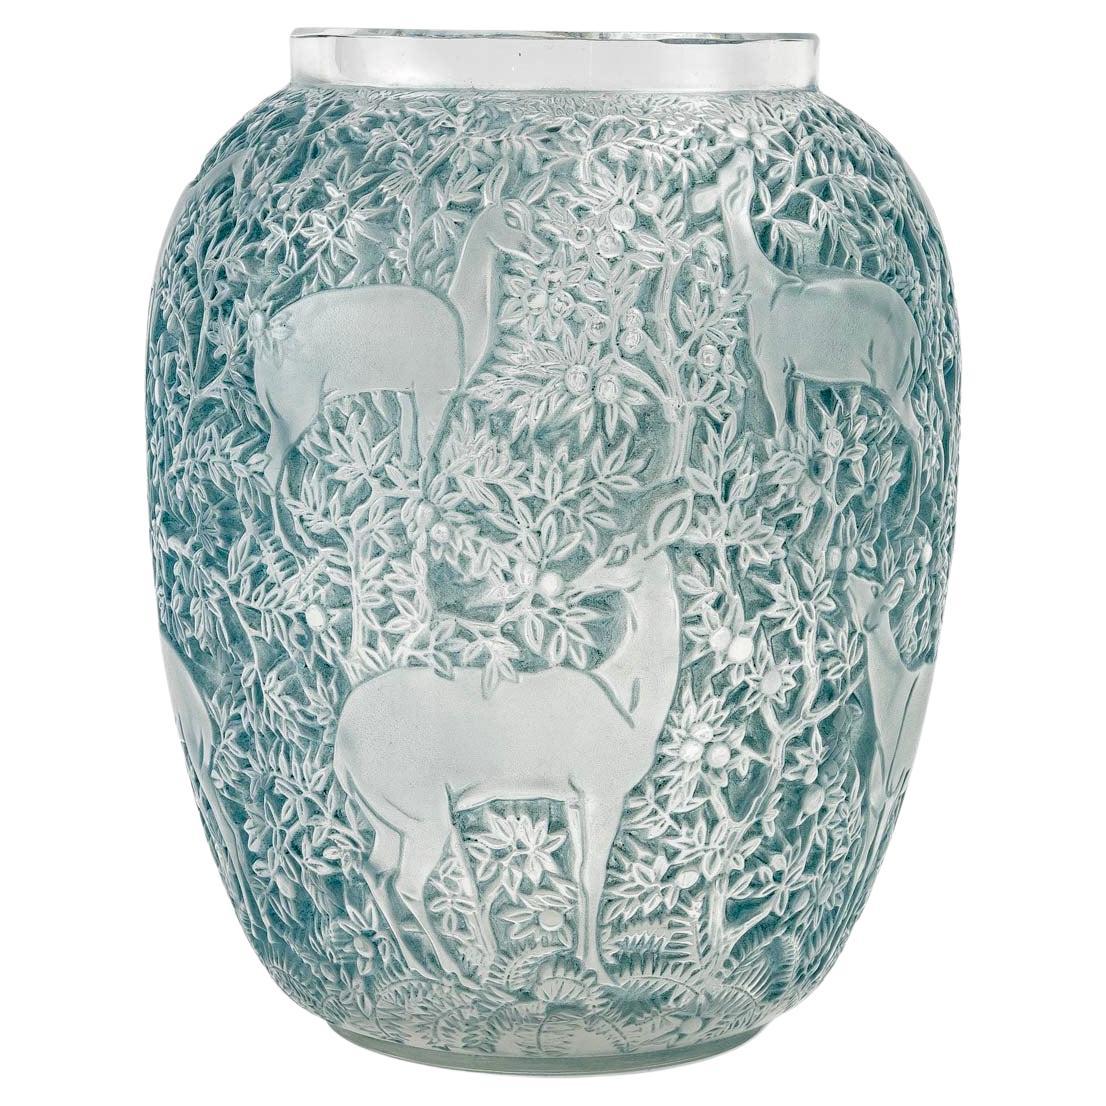 1932 René Lalique Original Biches Vase in Frosted Glass with Bleu Patina